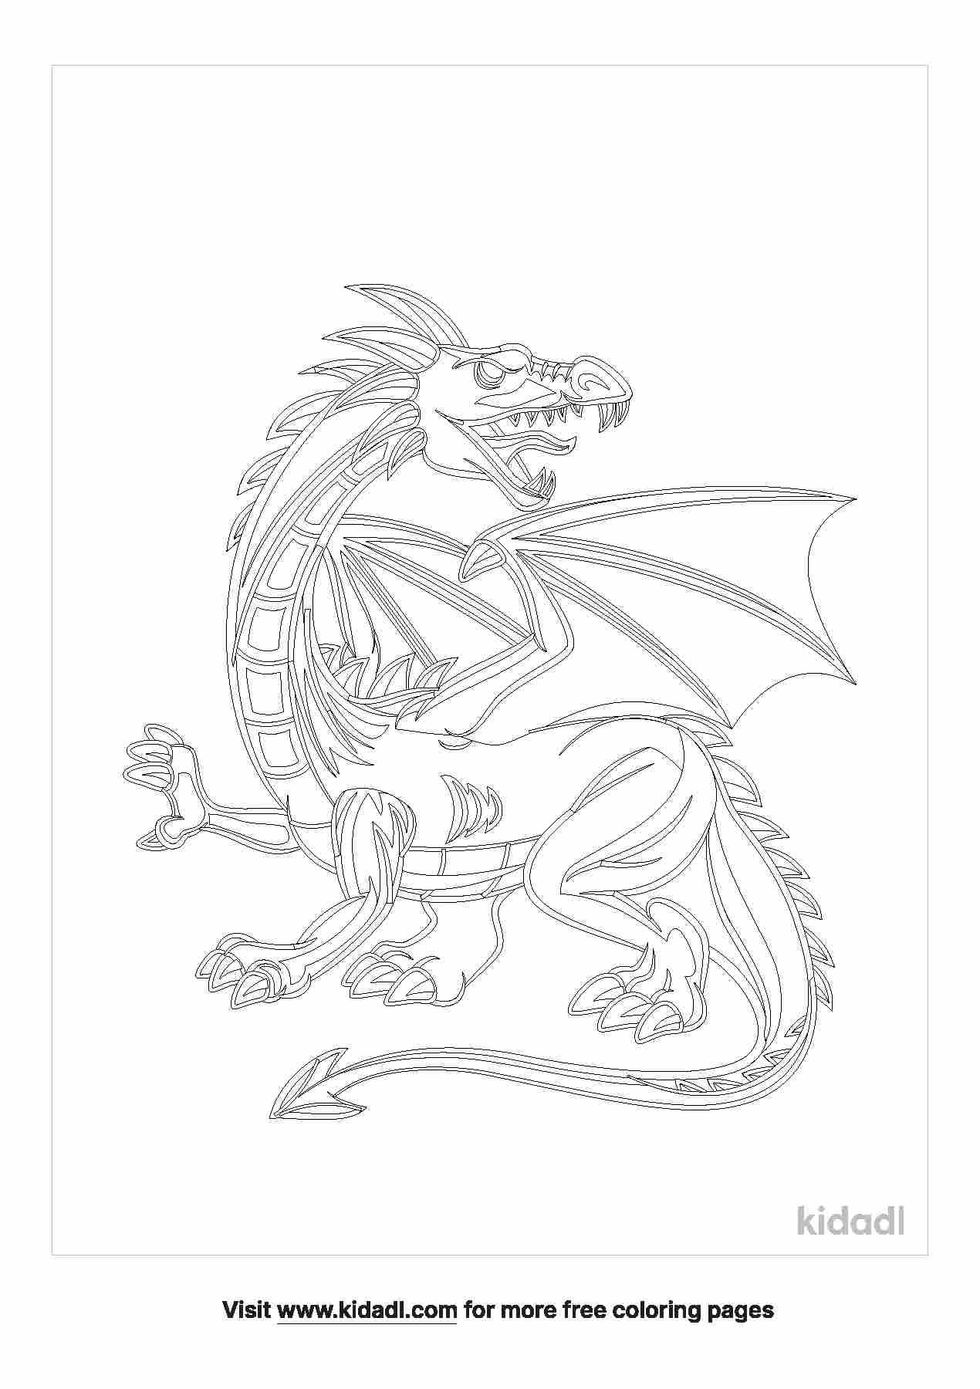 coloring page that contain angry dragon